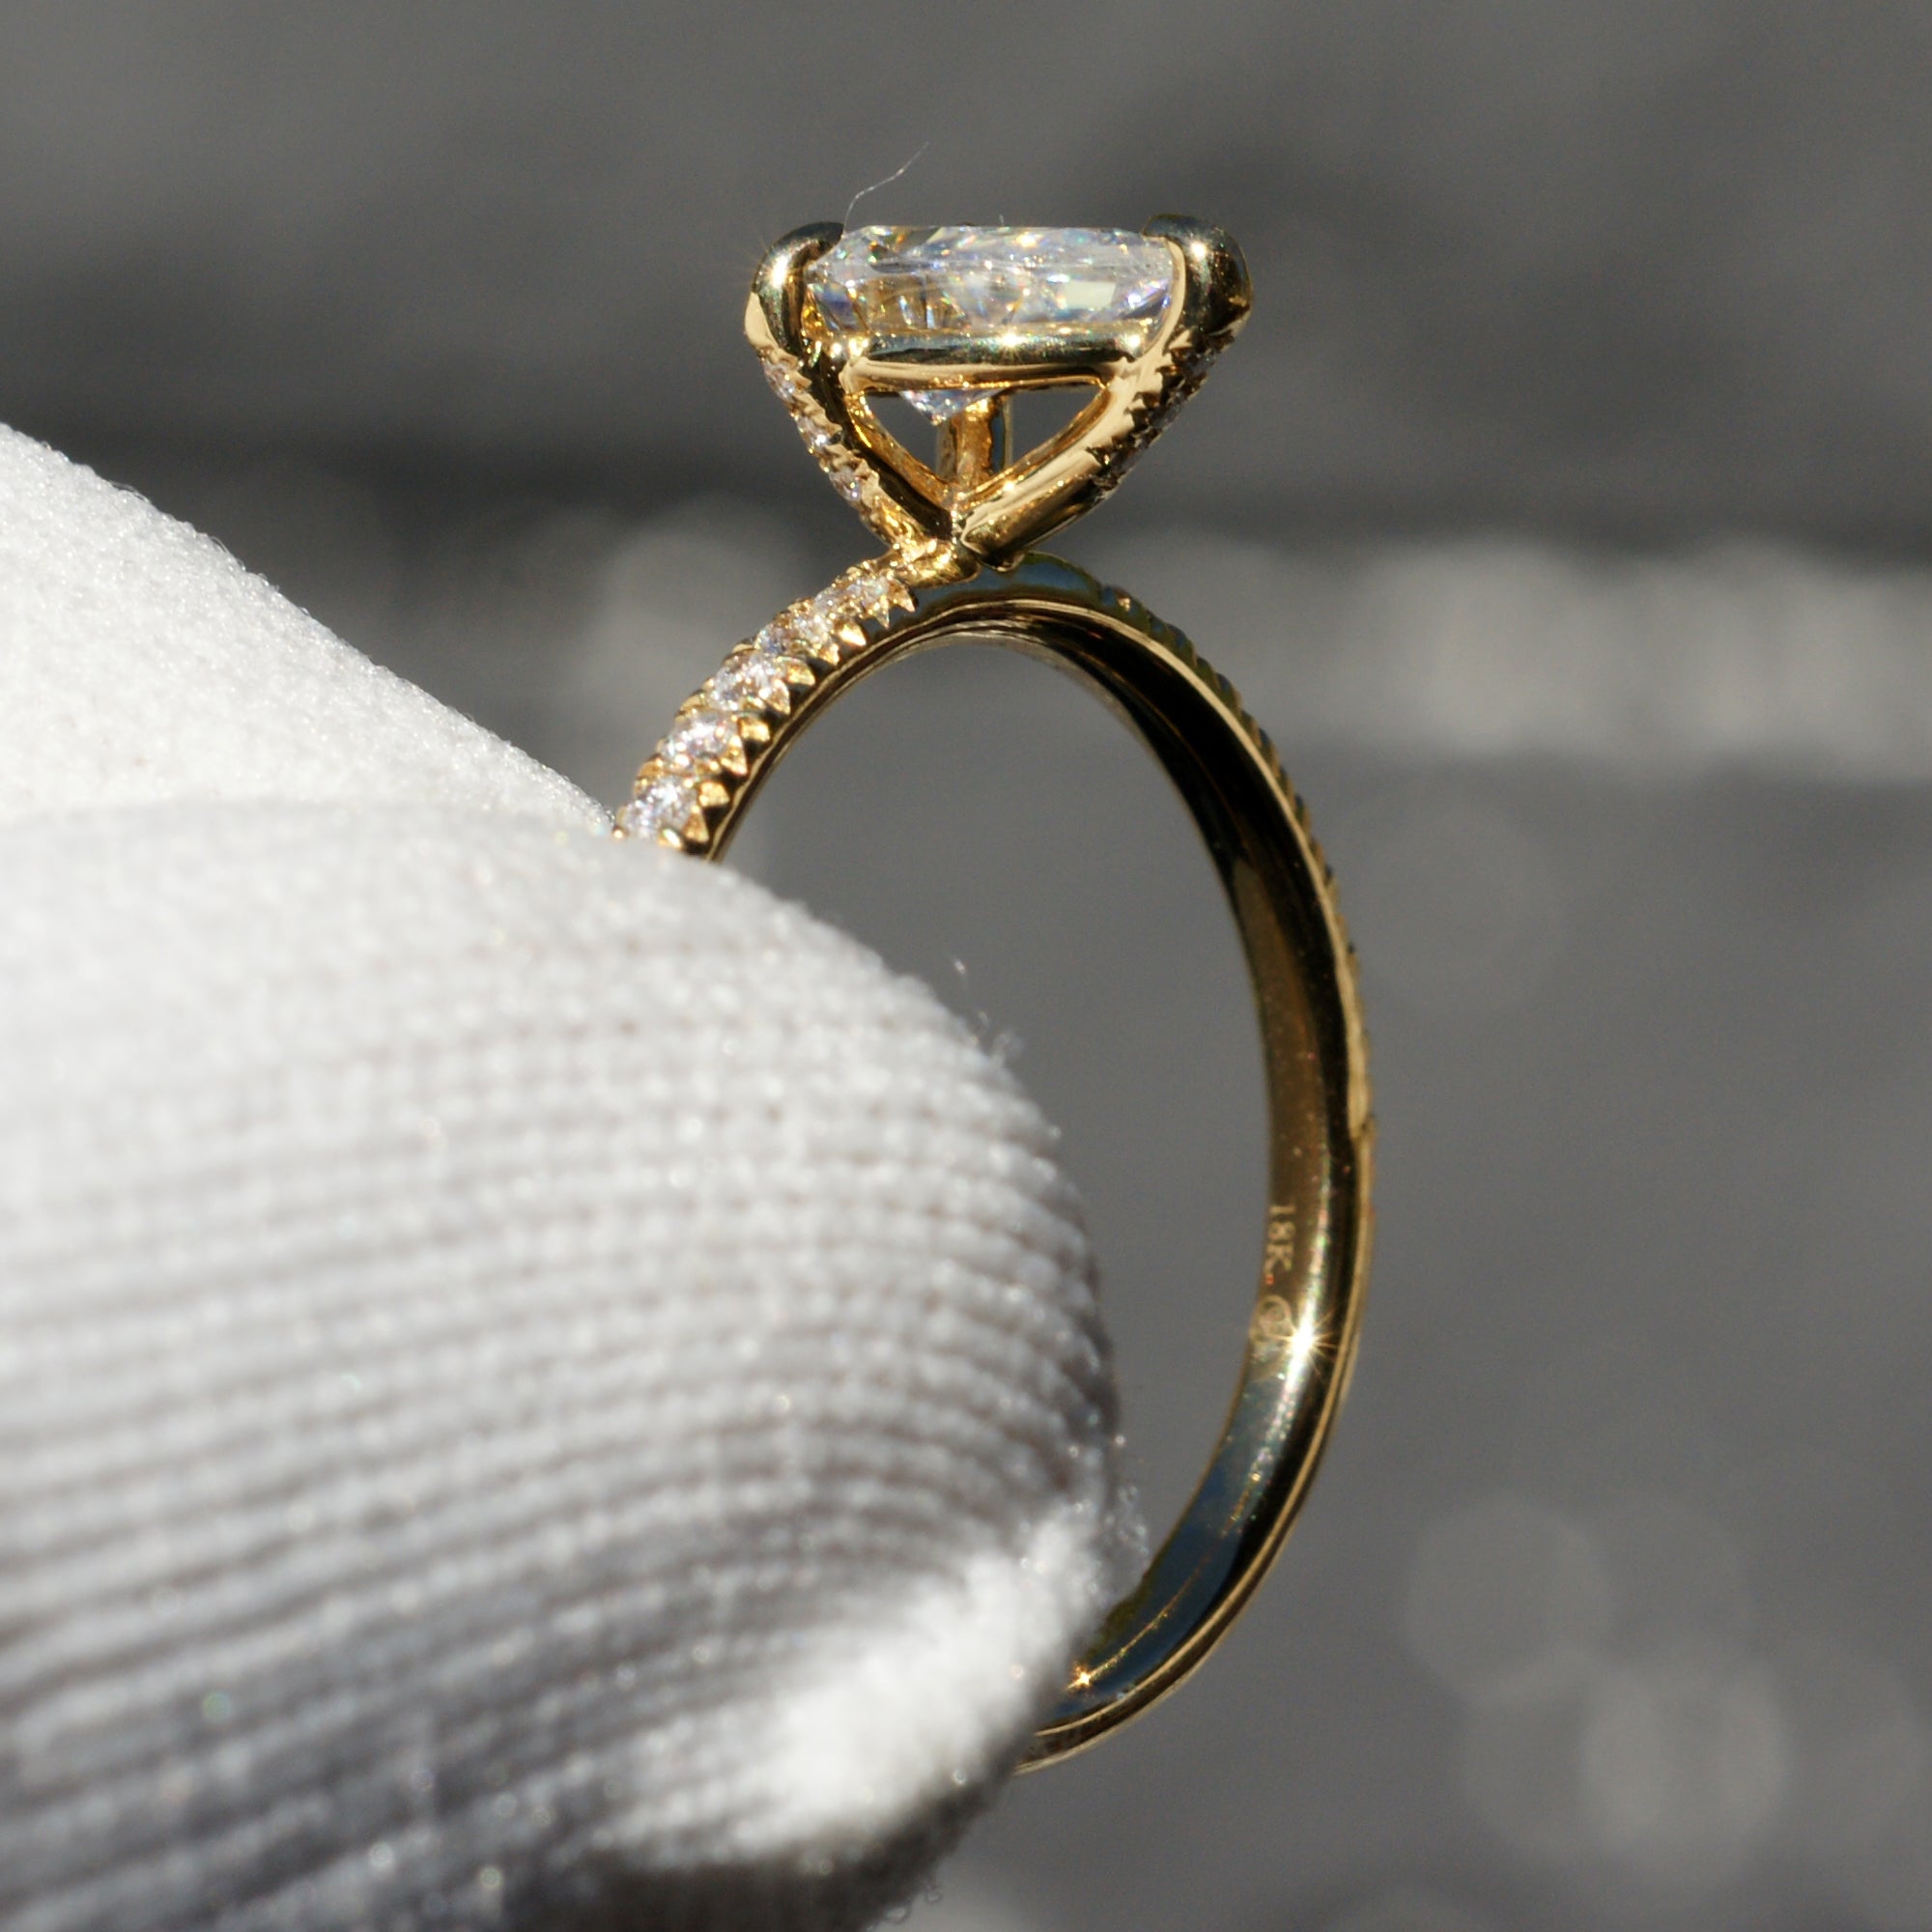 Pear moissanite engagement ring in yellow gold with diamond accent on prongs